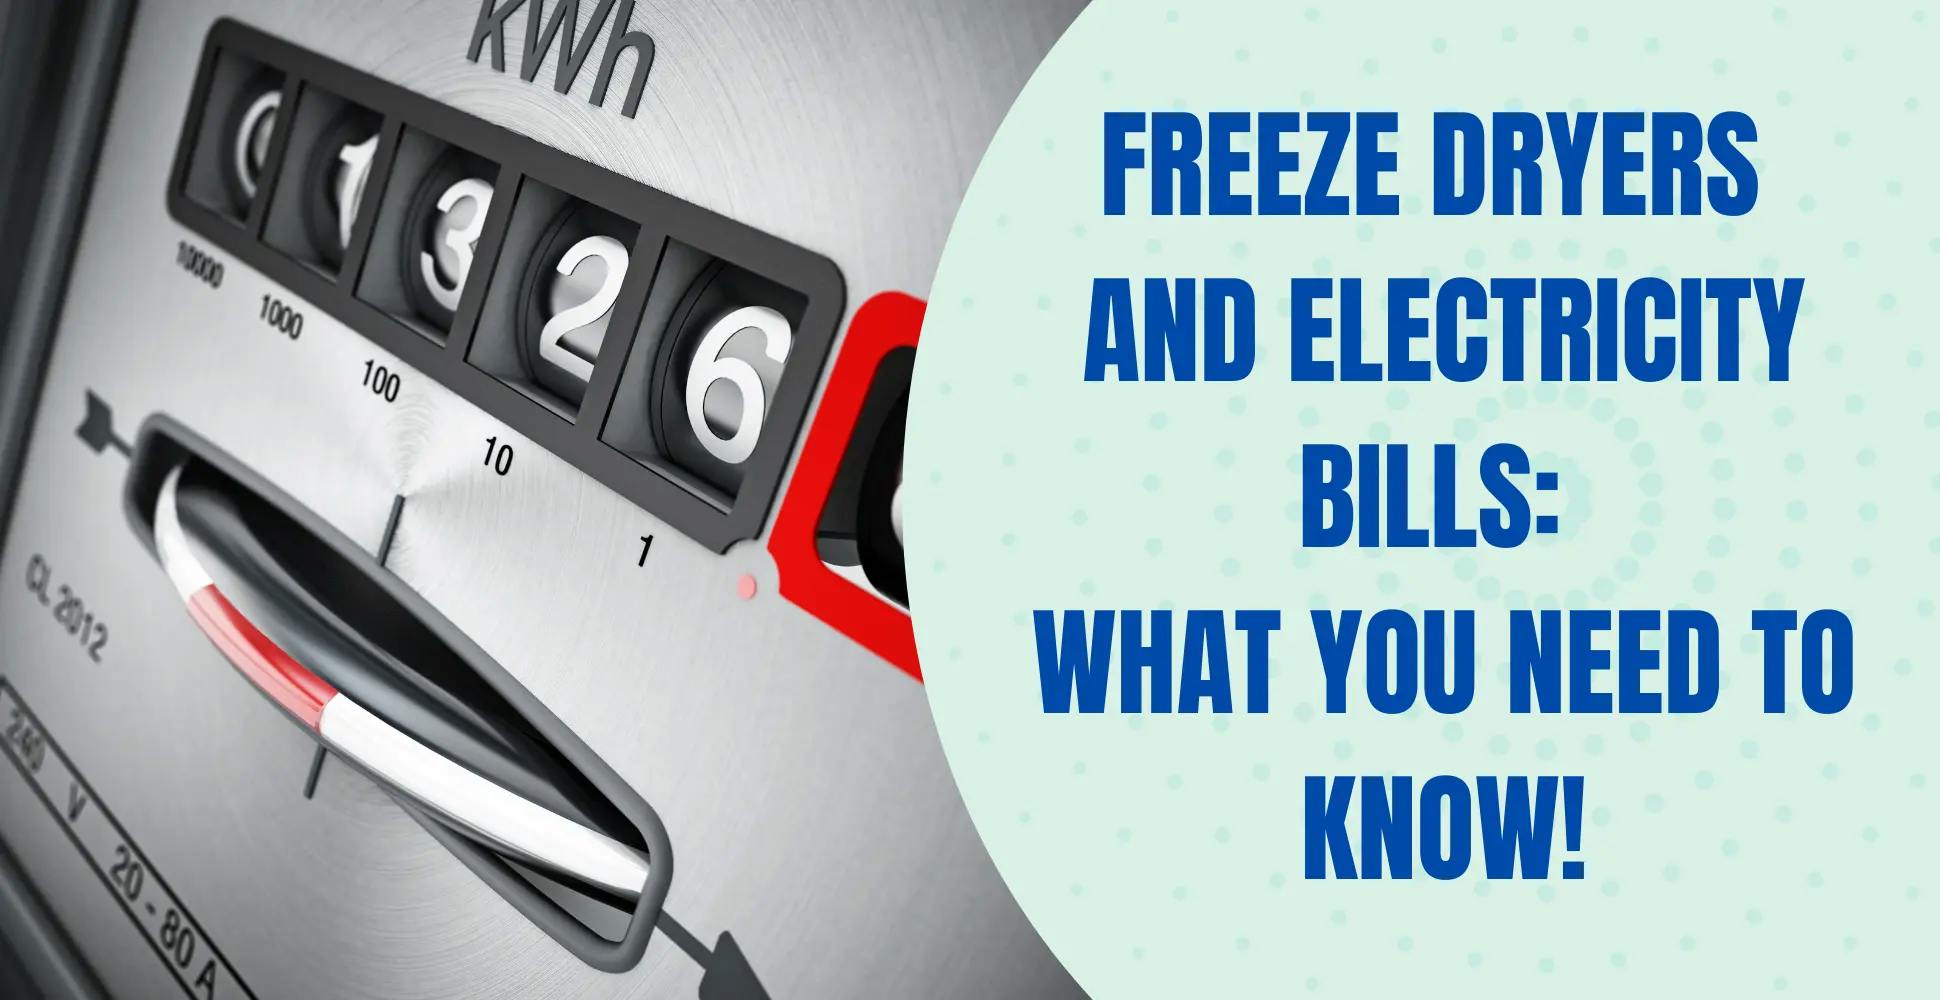 Do Freeze Dryers Use a Lot of Electricity